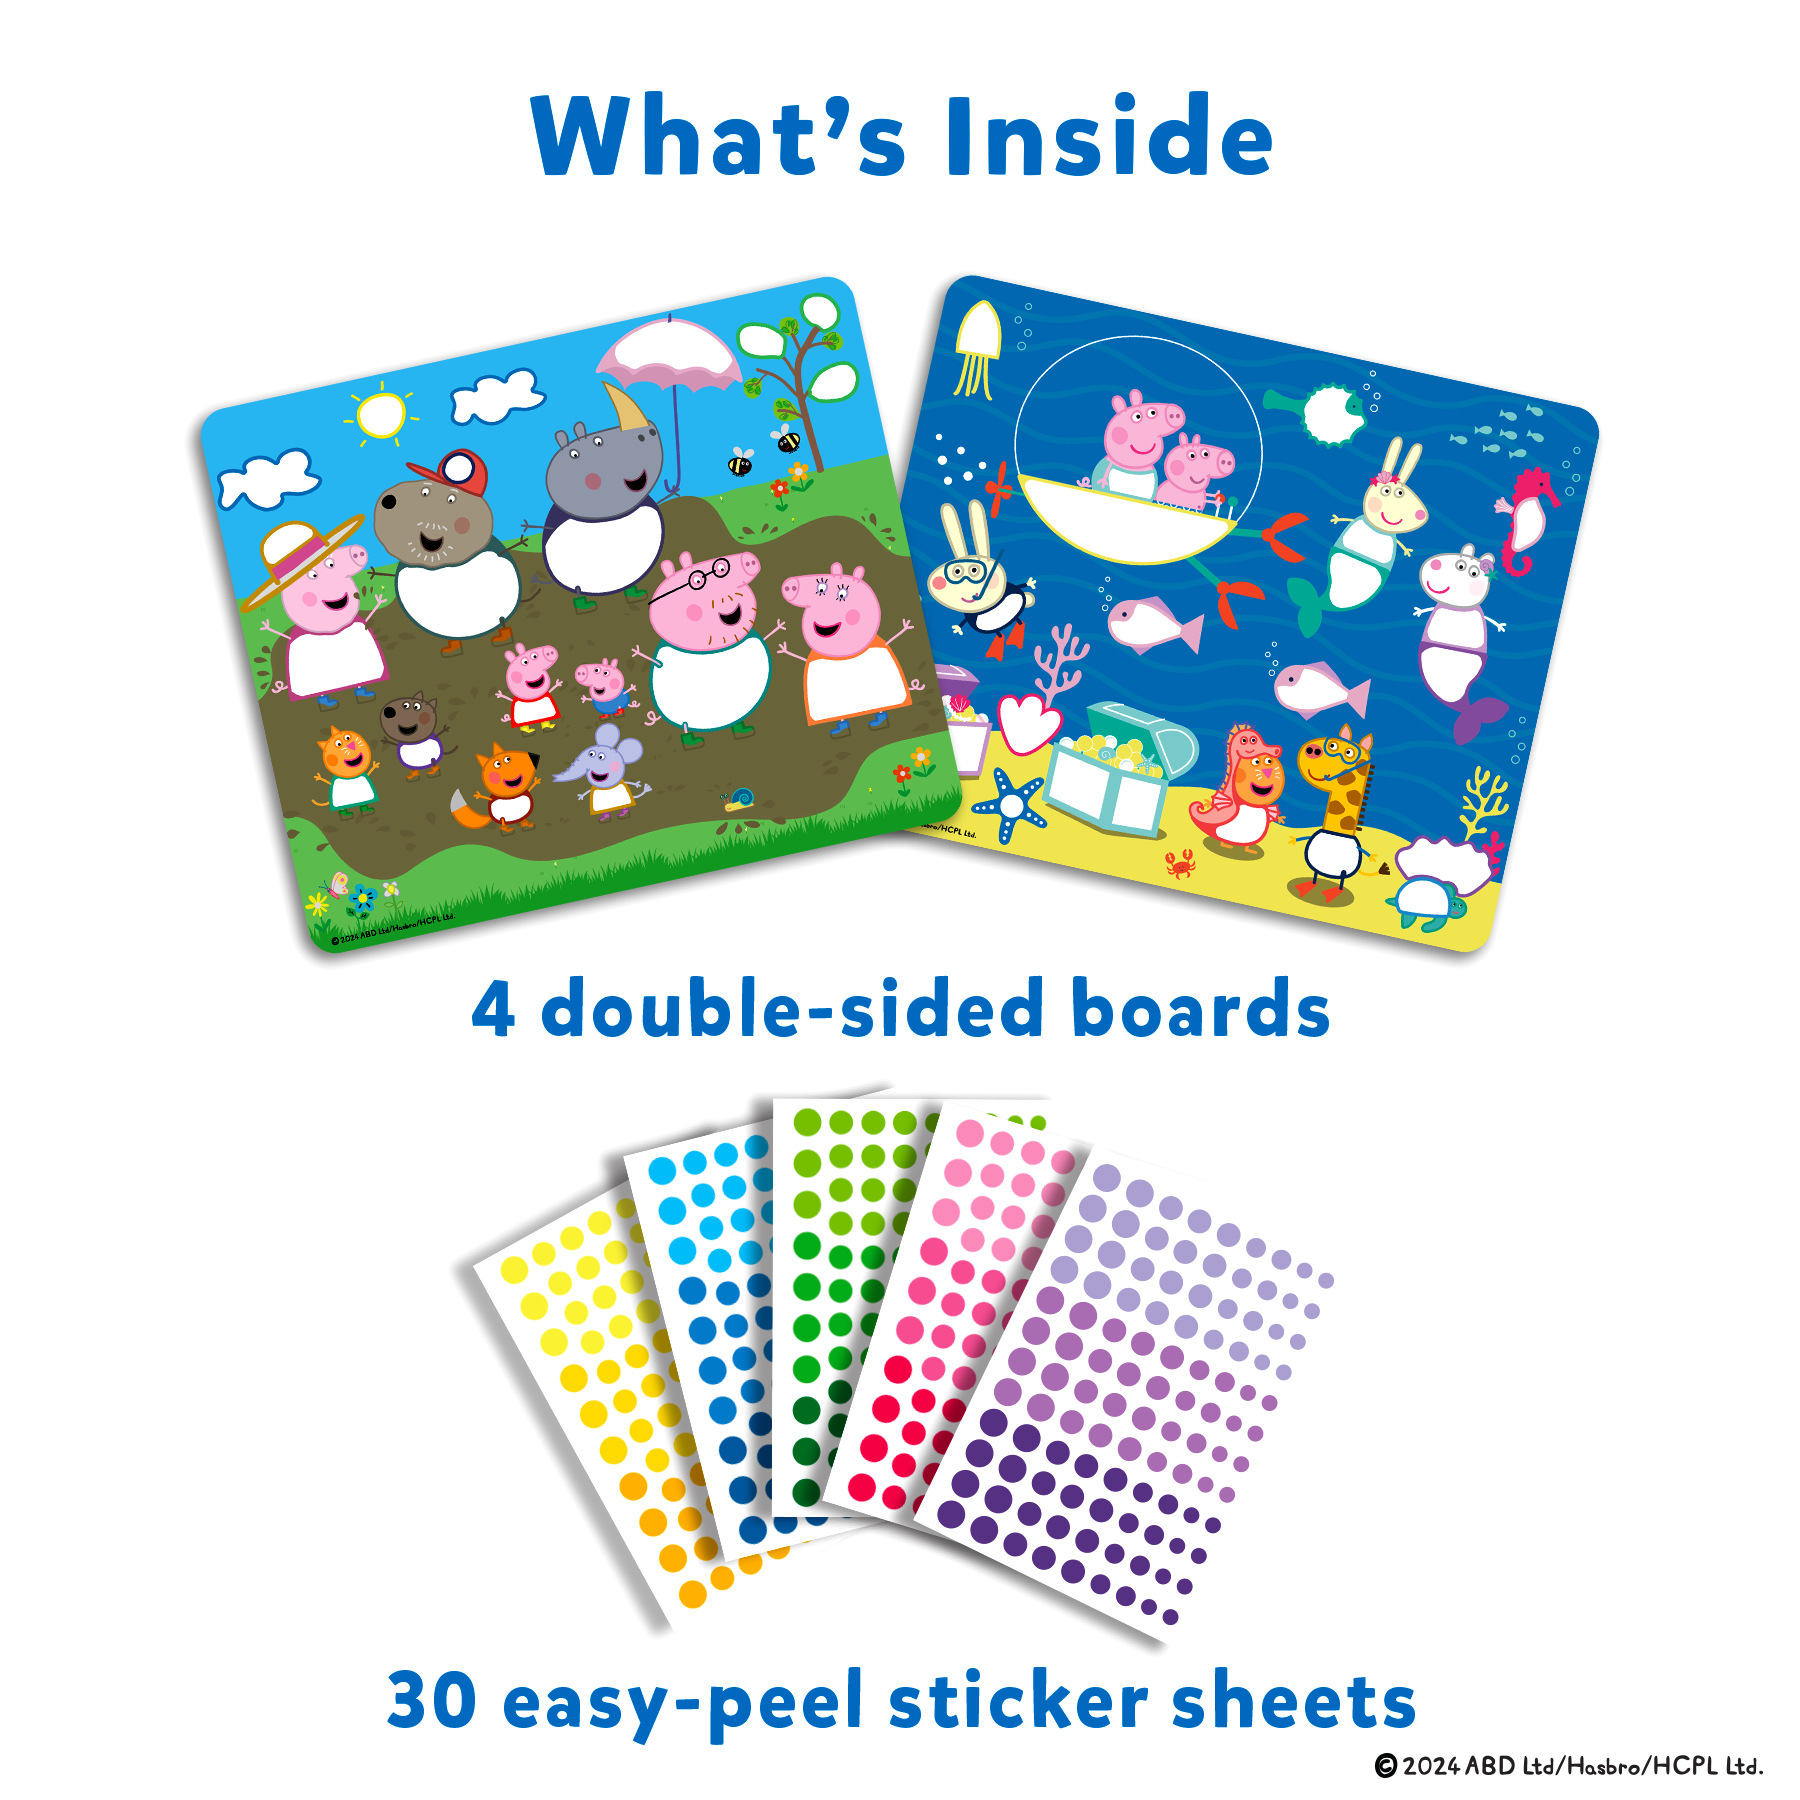 Skillmatics Art Activity - Dot It Peppa Pig, Mess-Free Sticker Art for Kids, Craft Kits, DIY Activity, Gifts for Boys & Girls Ages 3, 4, 5, 6, 7, Travel Toys for Toddlers